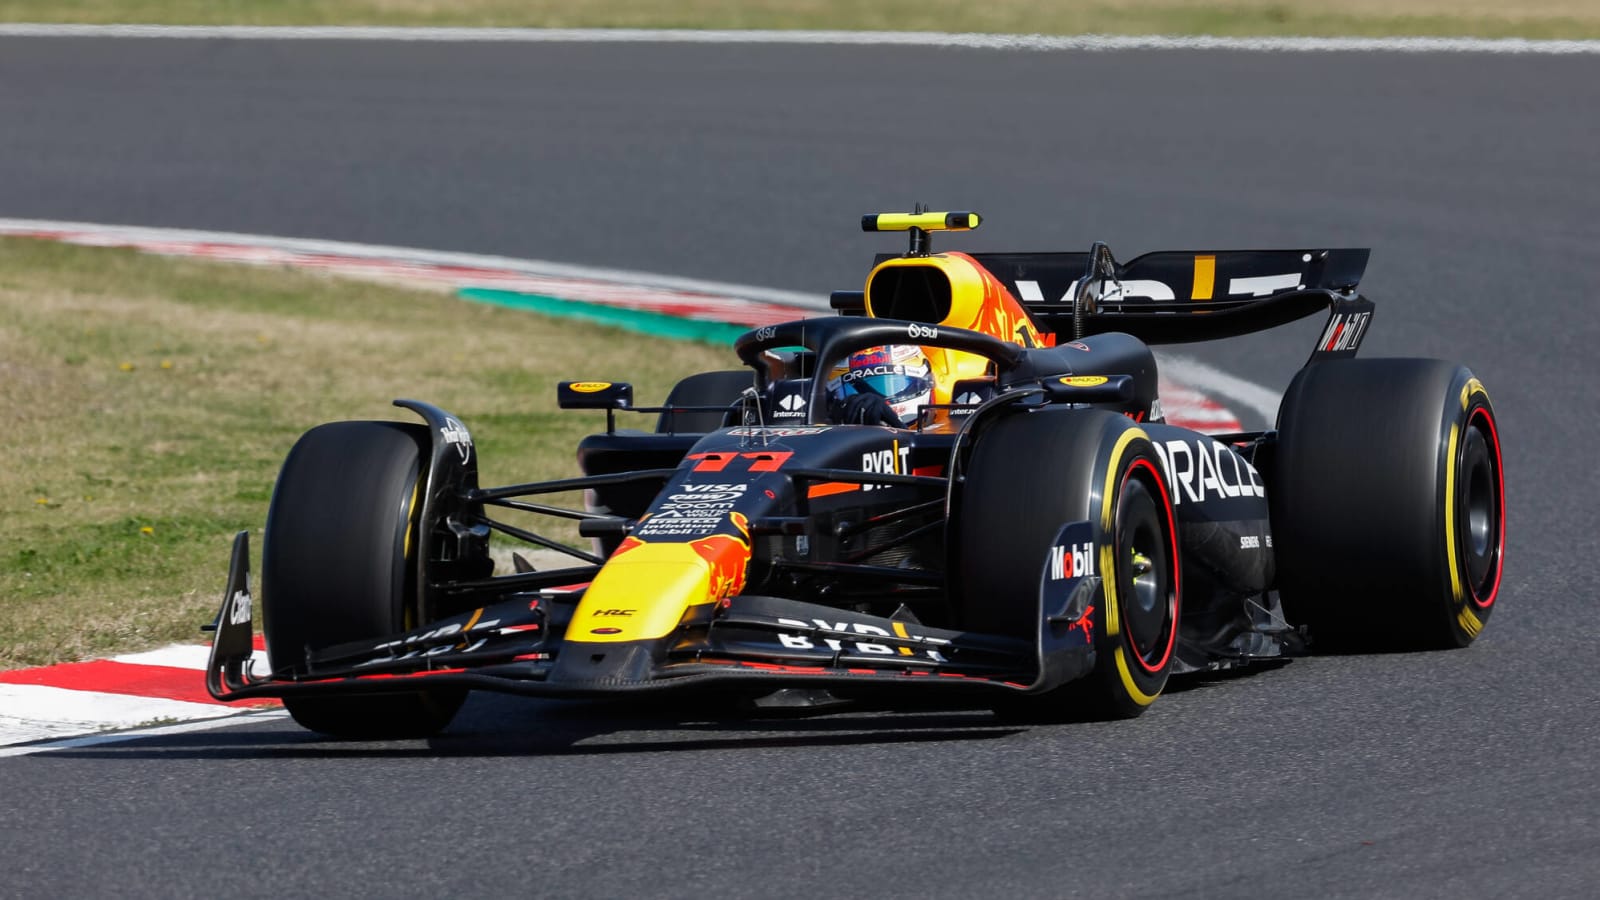 Christian Horner claims Sergio Perez raced like he had ‘no children’ in the Japanese GP